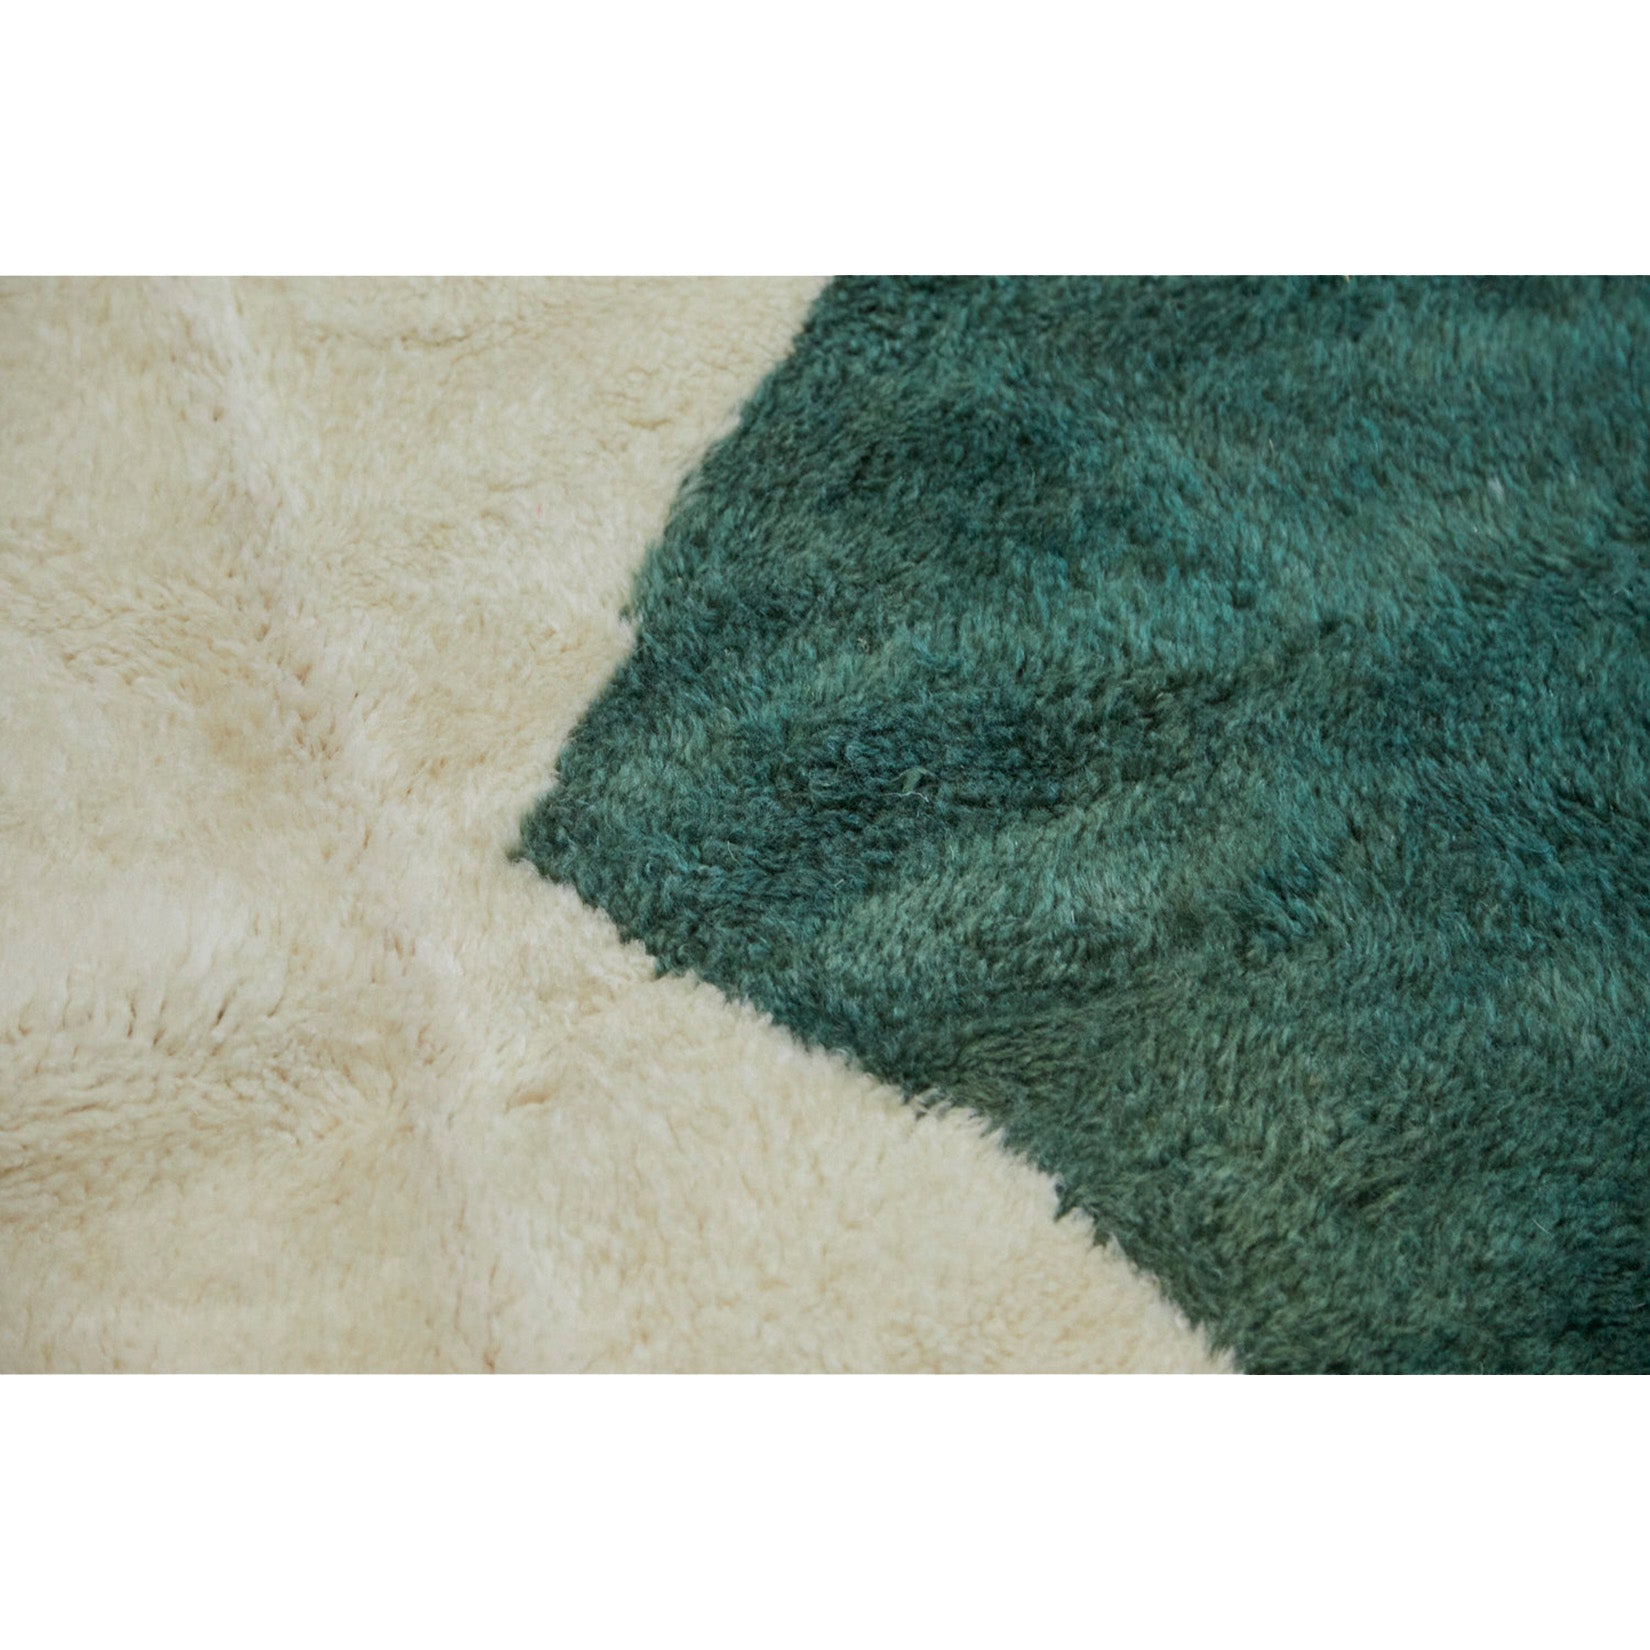 White Moroccan oversize rug with burnt orange and forest green pattern - Kantara | Moroccan Rugs